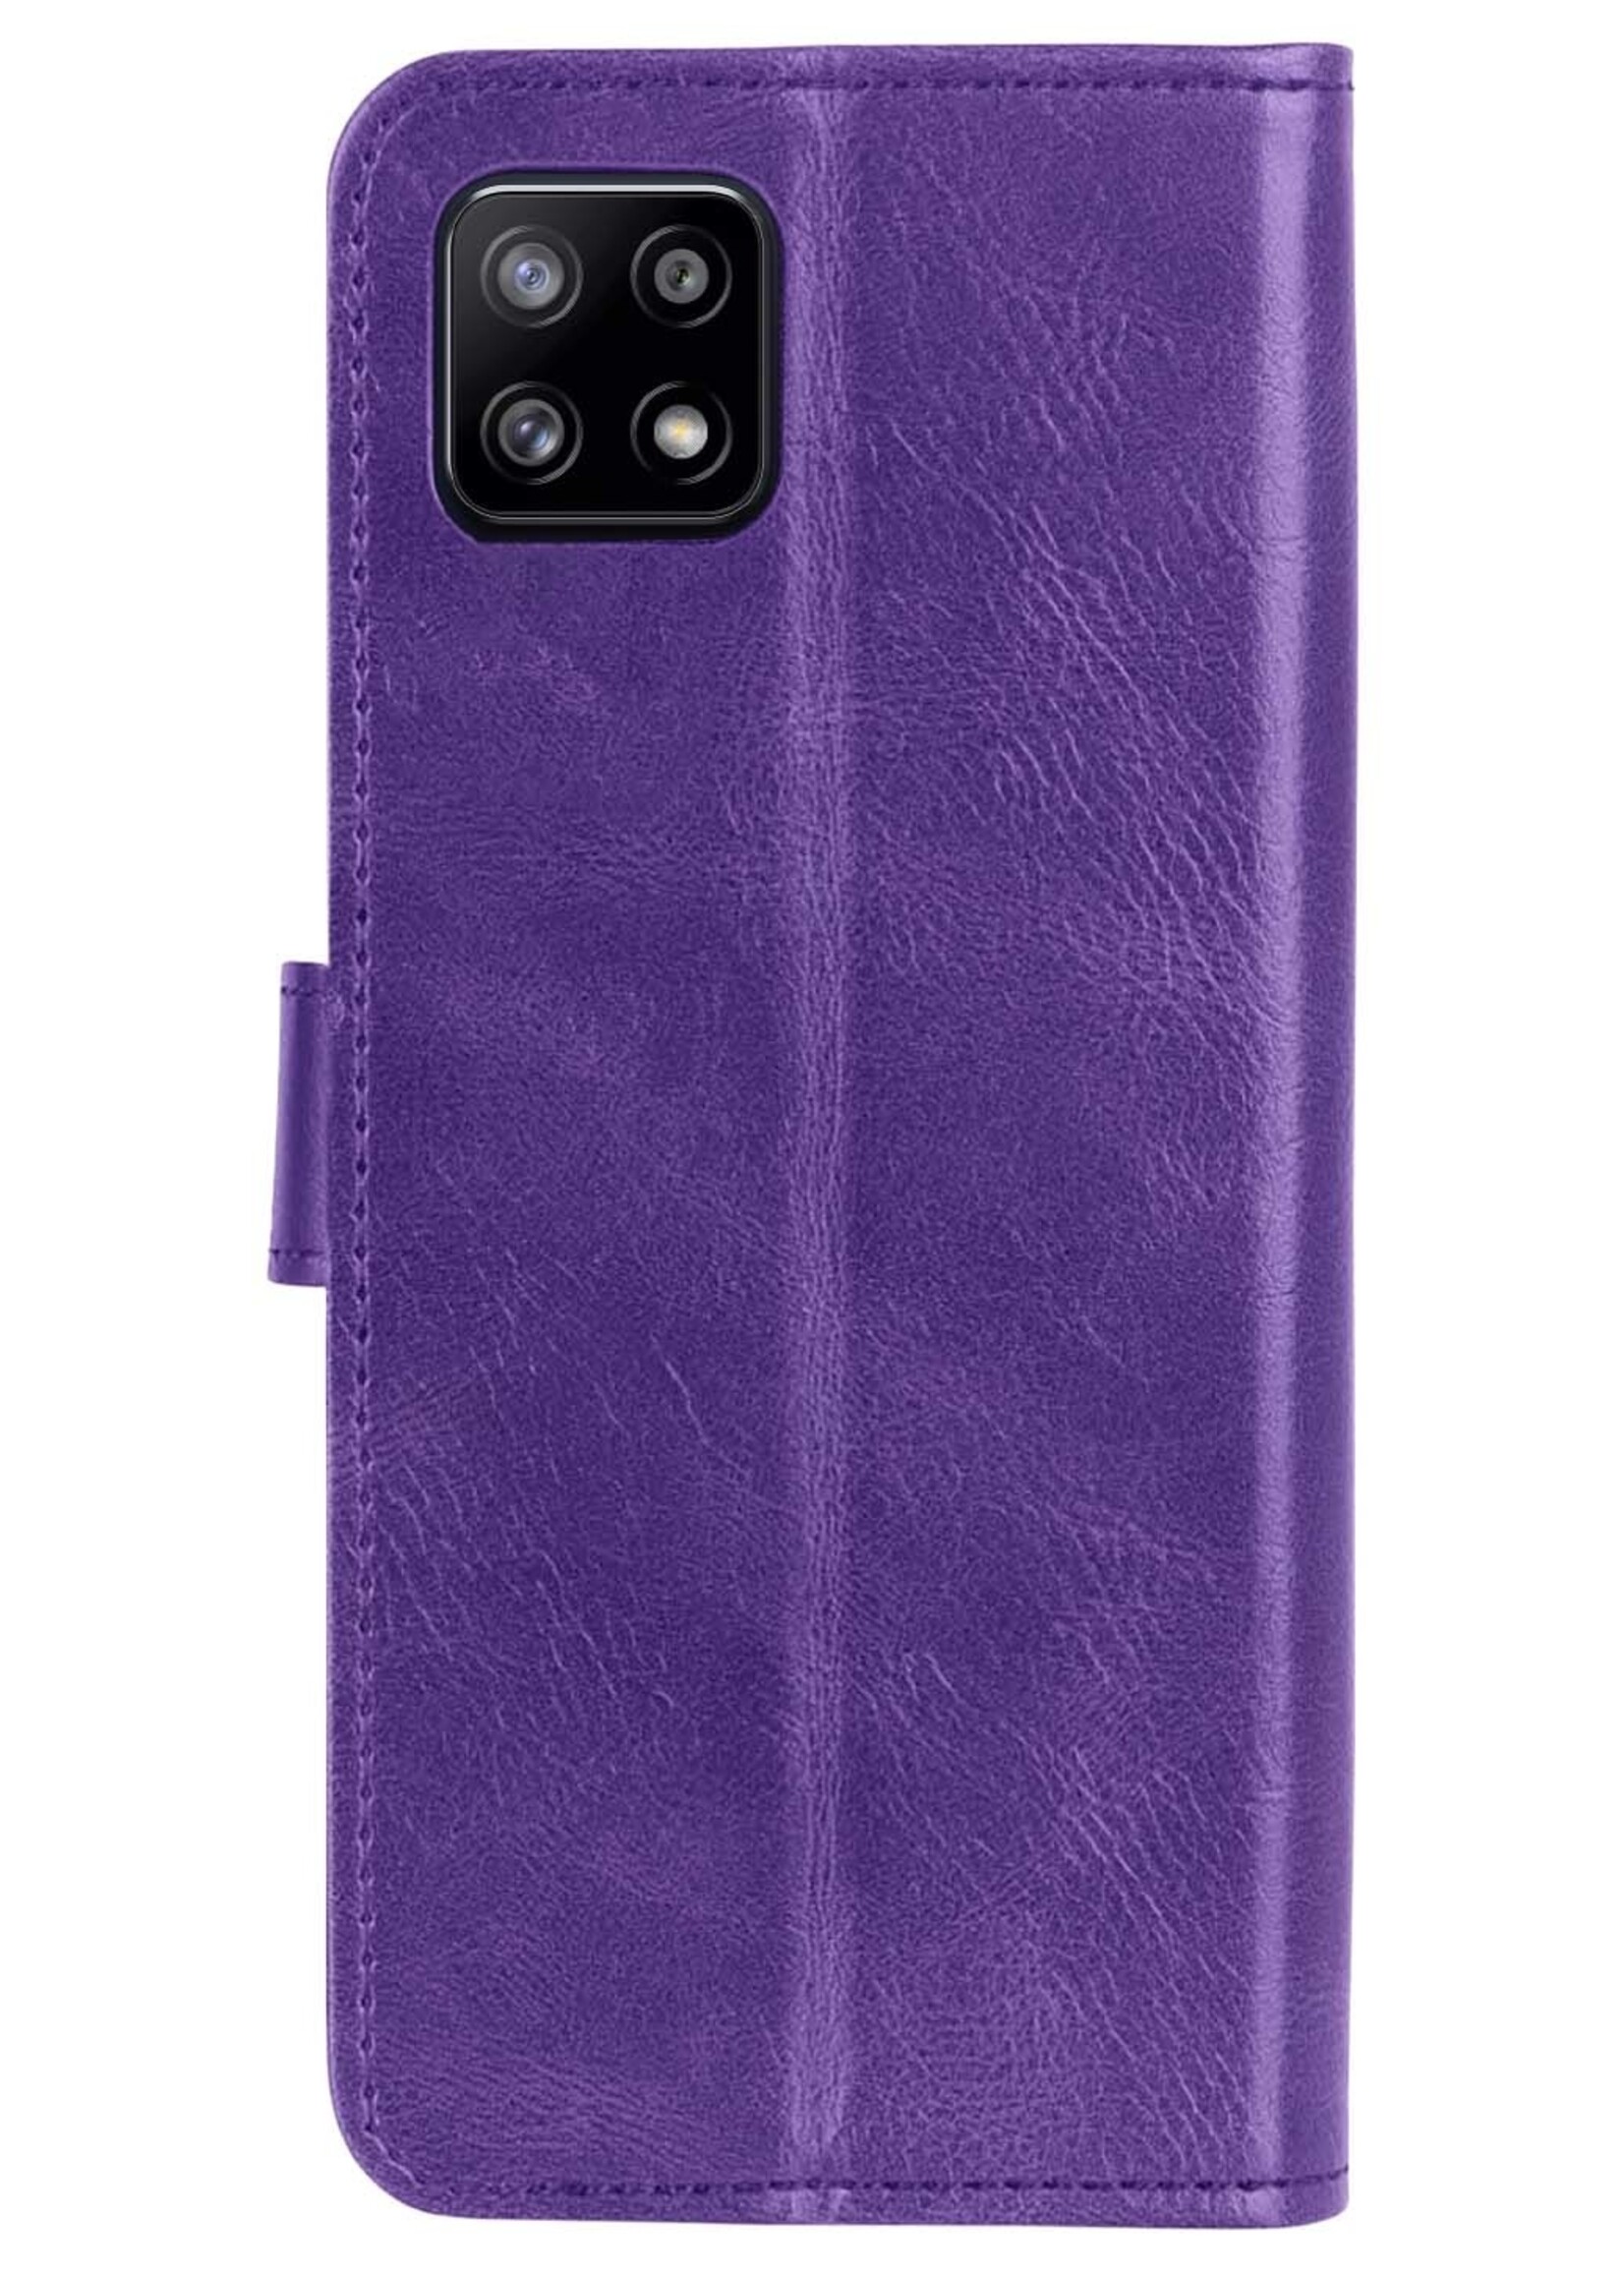 BTH Samsung M22 Hoesje Book Case Hoes - Samsung Galaxy M22 Case Hoesje Portemonnee Cover - Samsung Galaxy M22 Hoes Wallet Case Hoesje - Paars